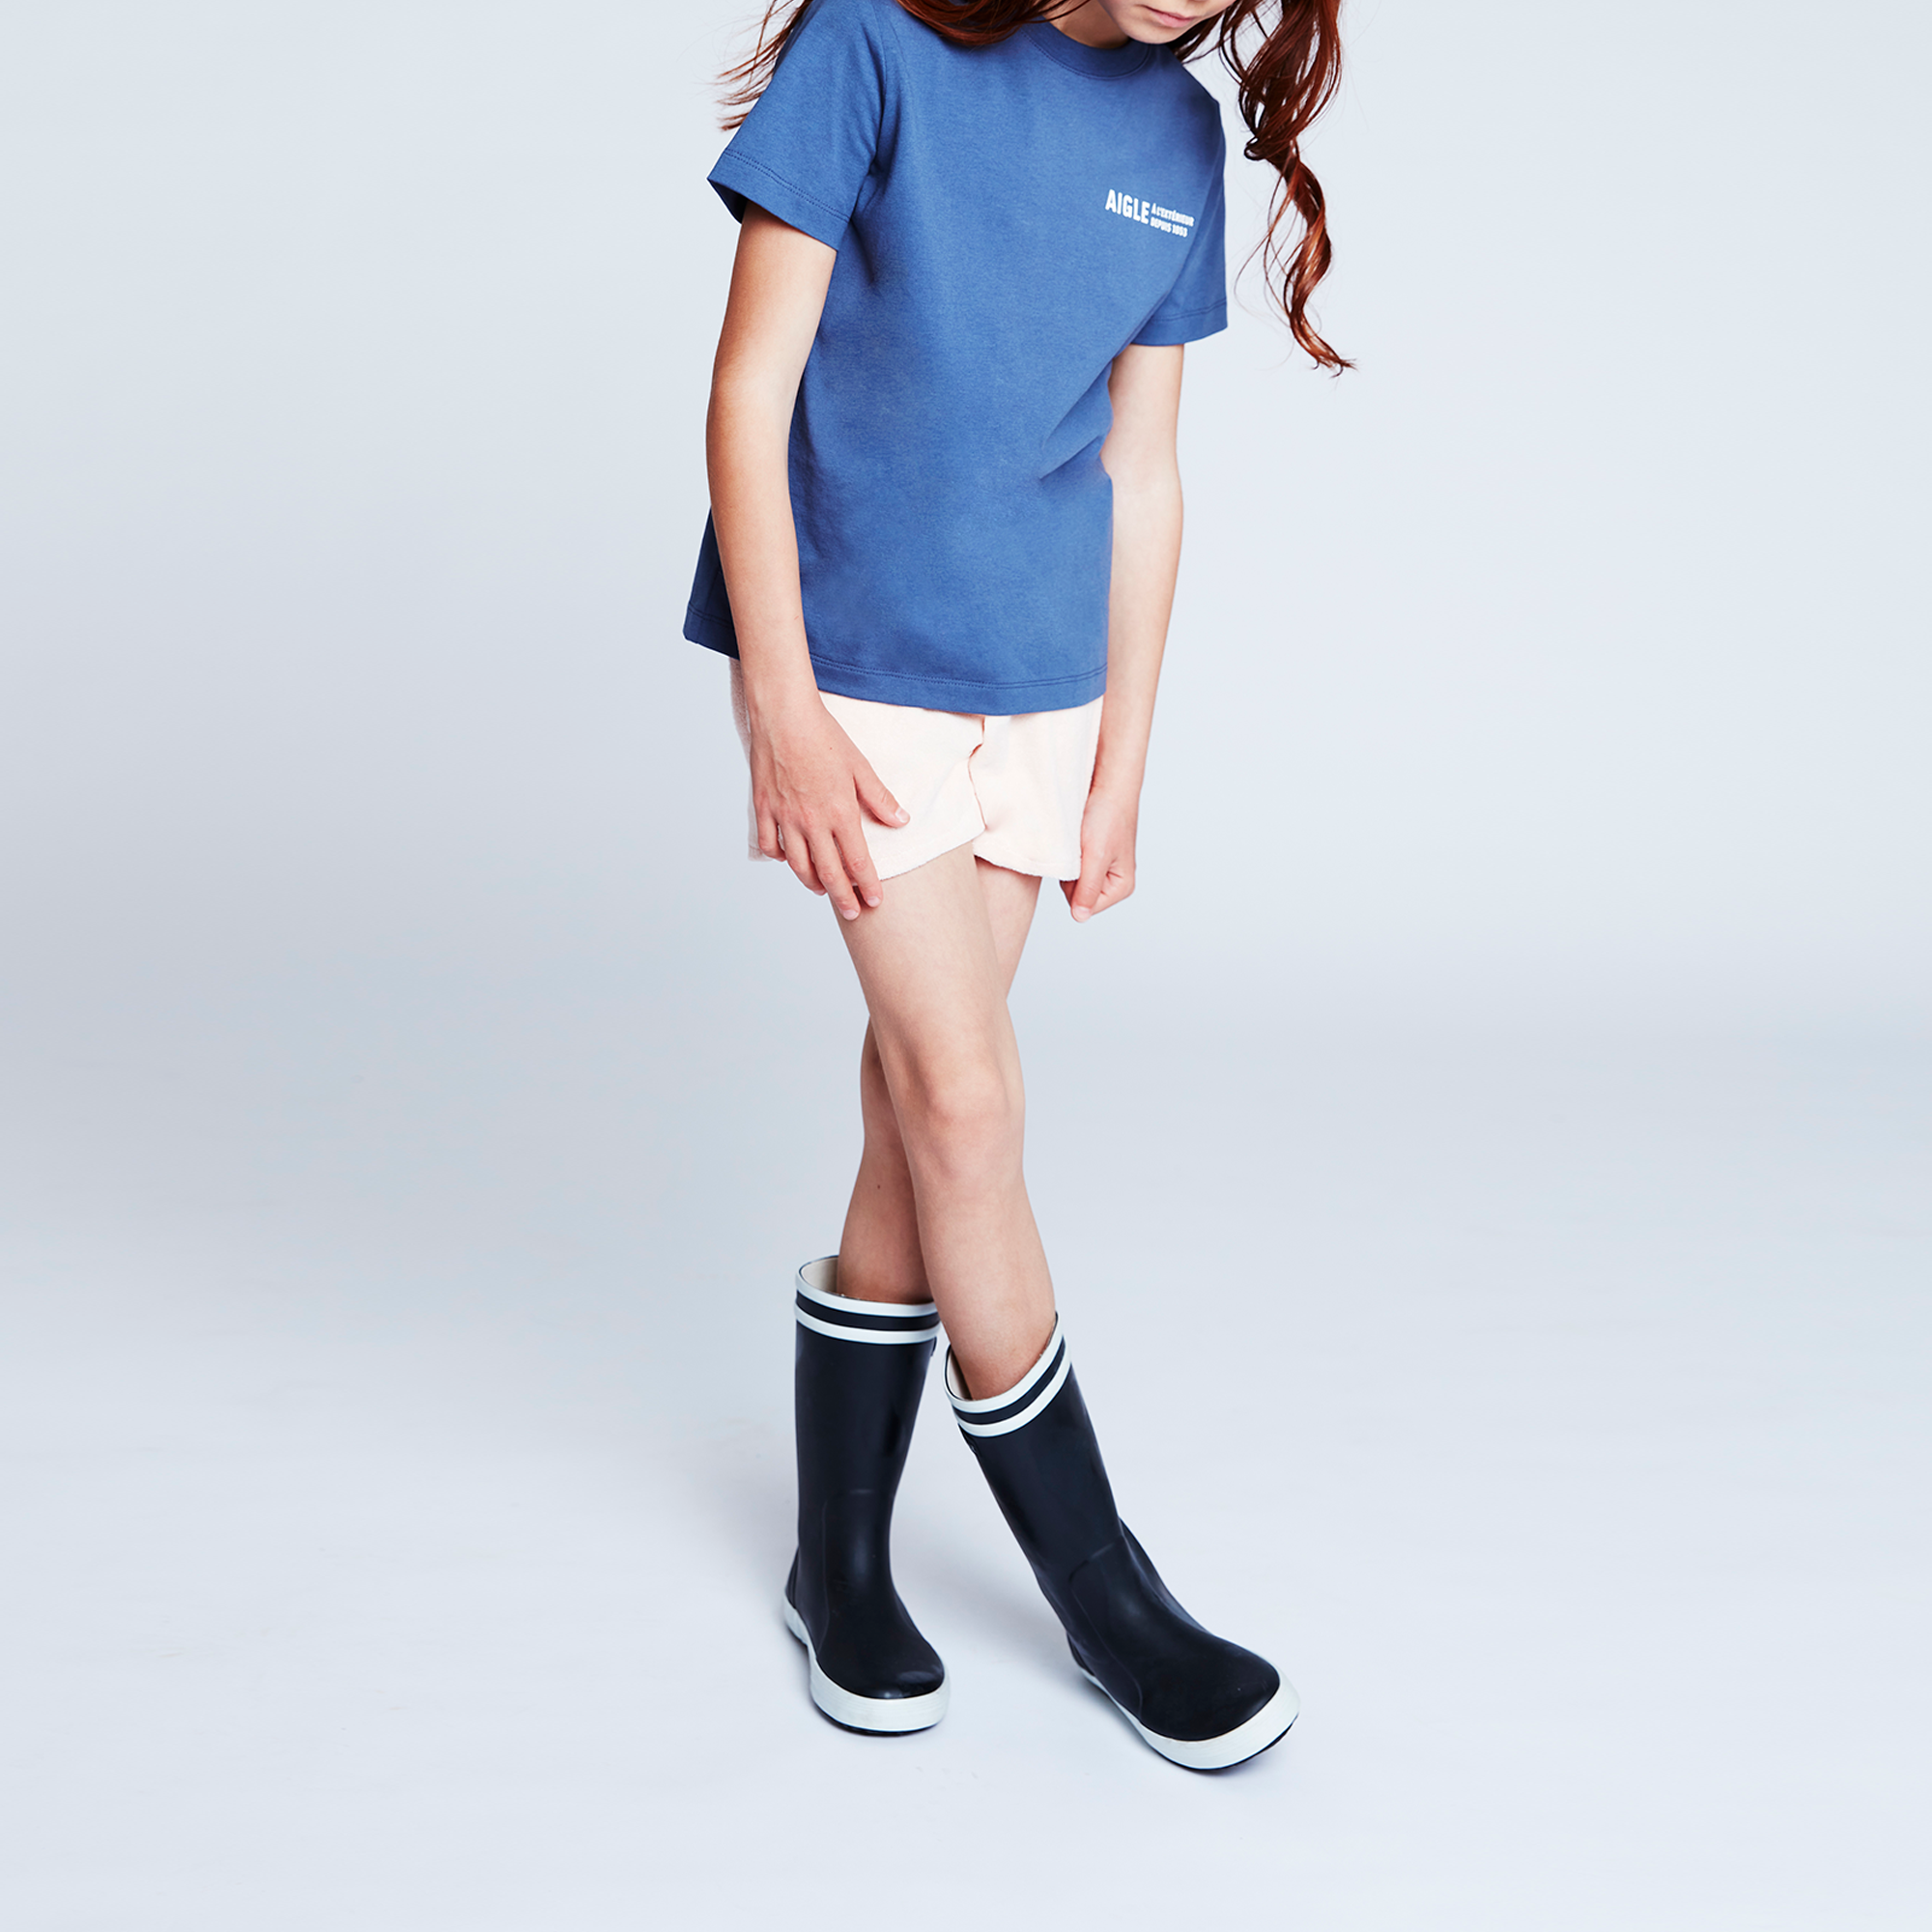 T-shirt with print AIGLE for UNISEX